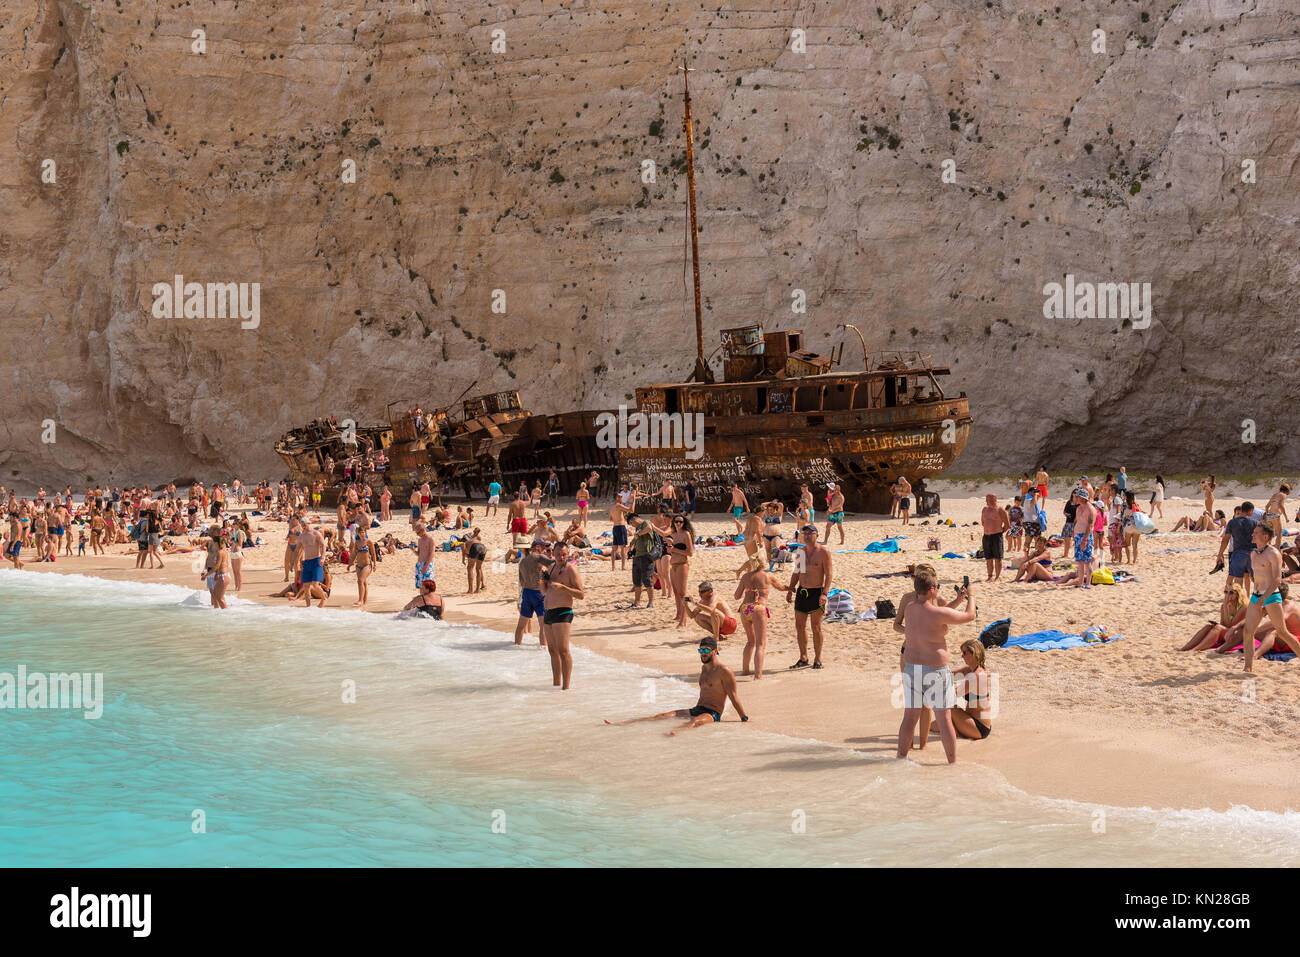 ZAKYNTHOS, GREECE, September 27, 2017: Tourists relaxing on the Navagio beach with a shipwreck on the island of Zakynthos. Greece. Stock Photo